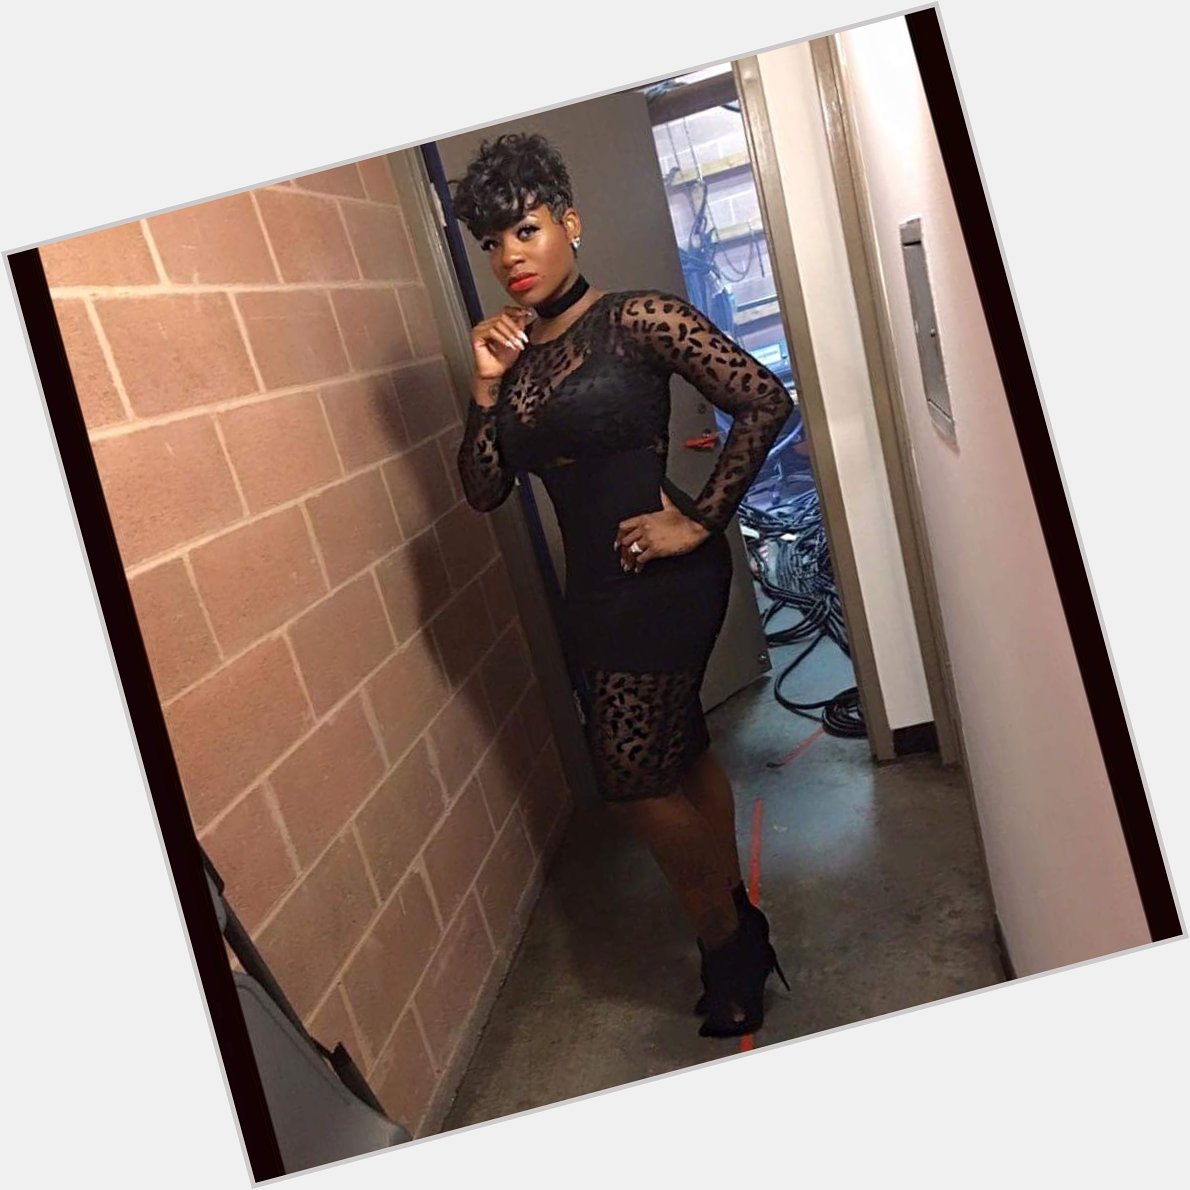 Happy Belated Birthday to Actress and Songtress Fantasia Barrino born on June 30,1984. 